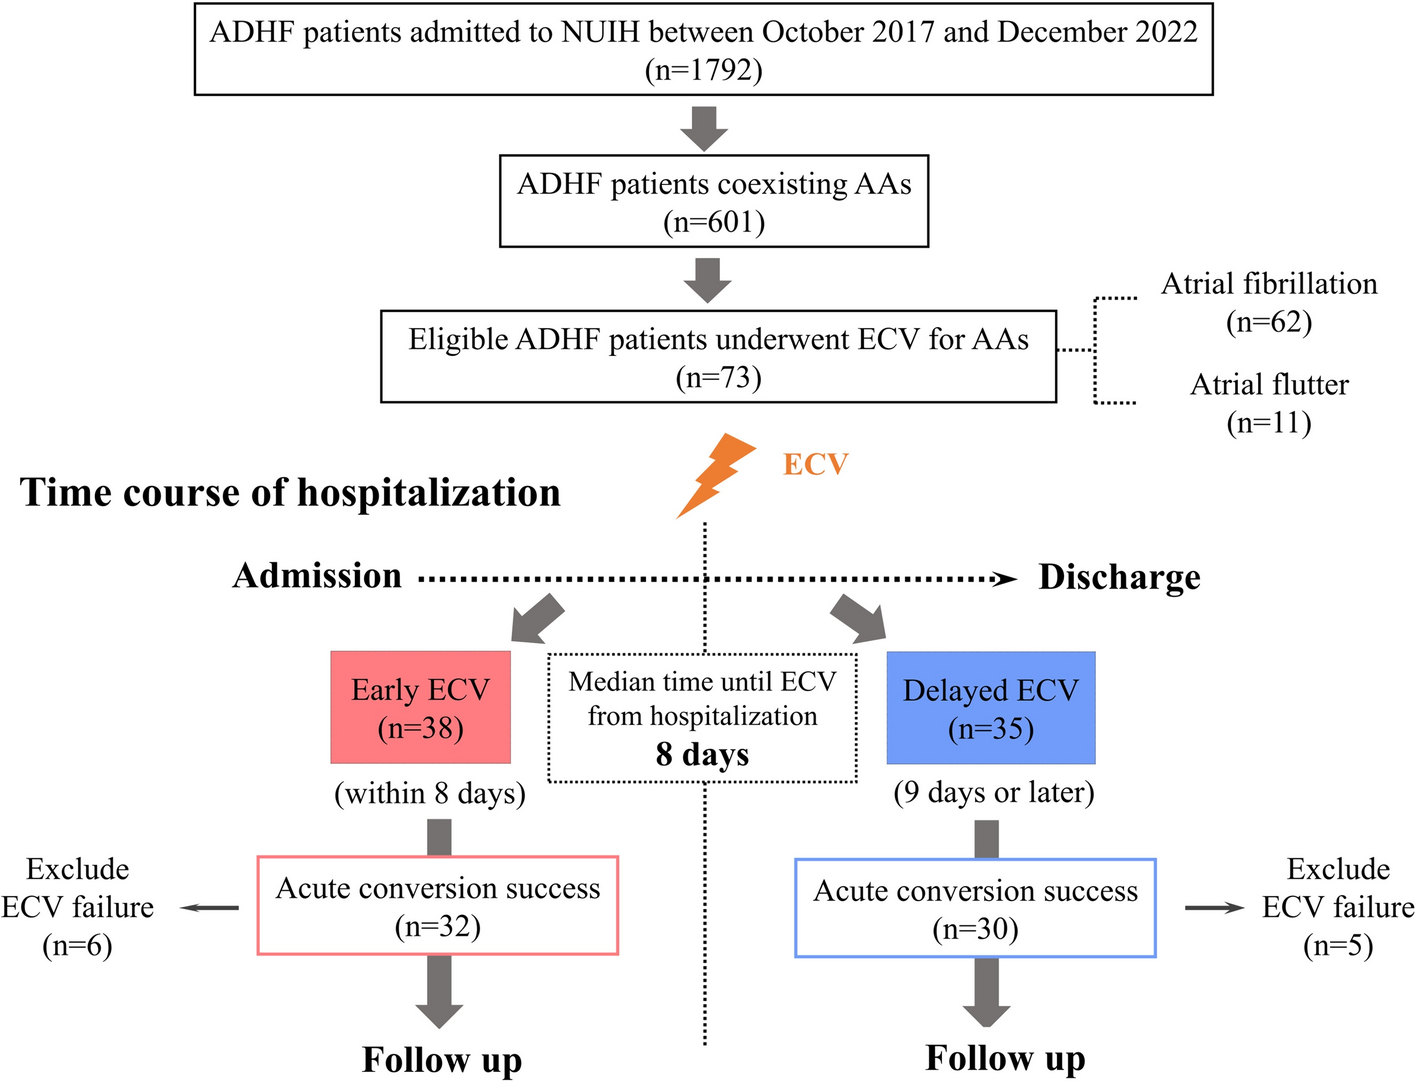 Optimal timing of electrical cardioversion for acute decompensated heart failure caused by atrial arrhythmias: The earlier, the better?